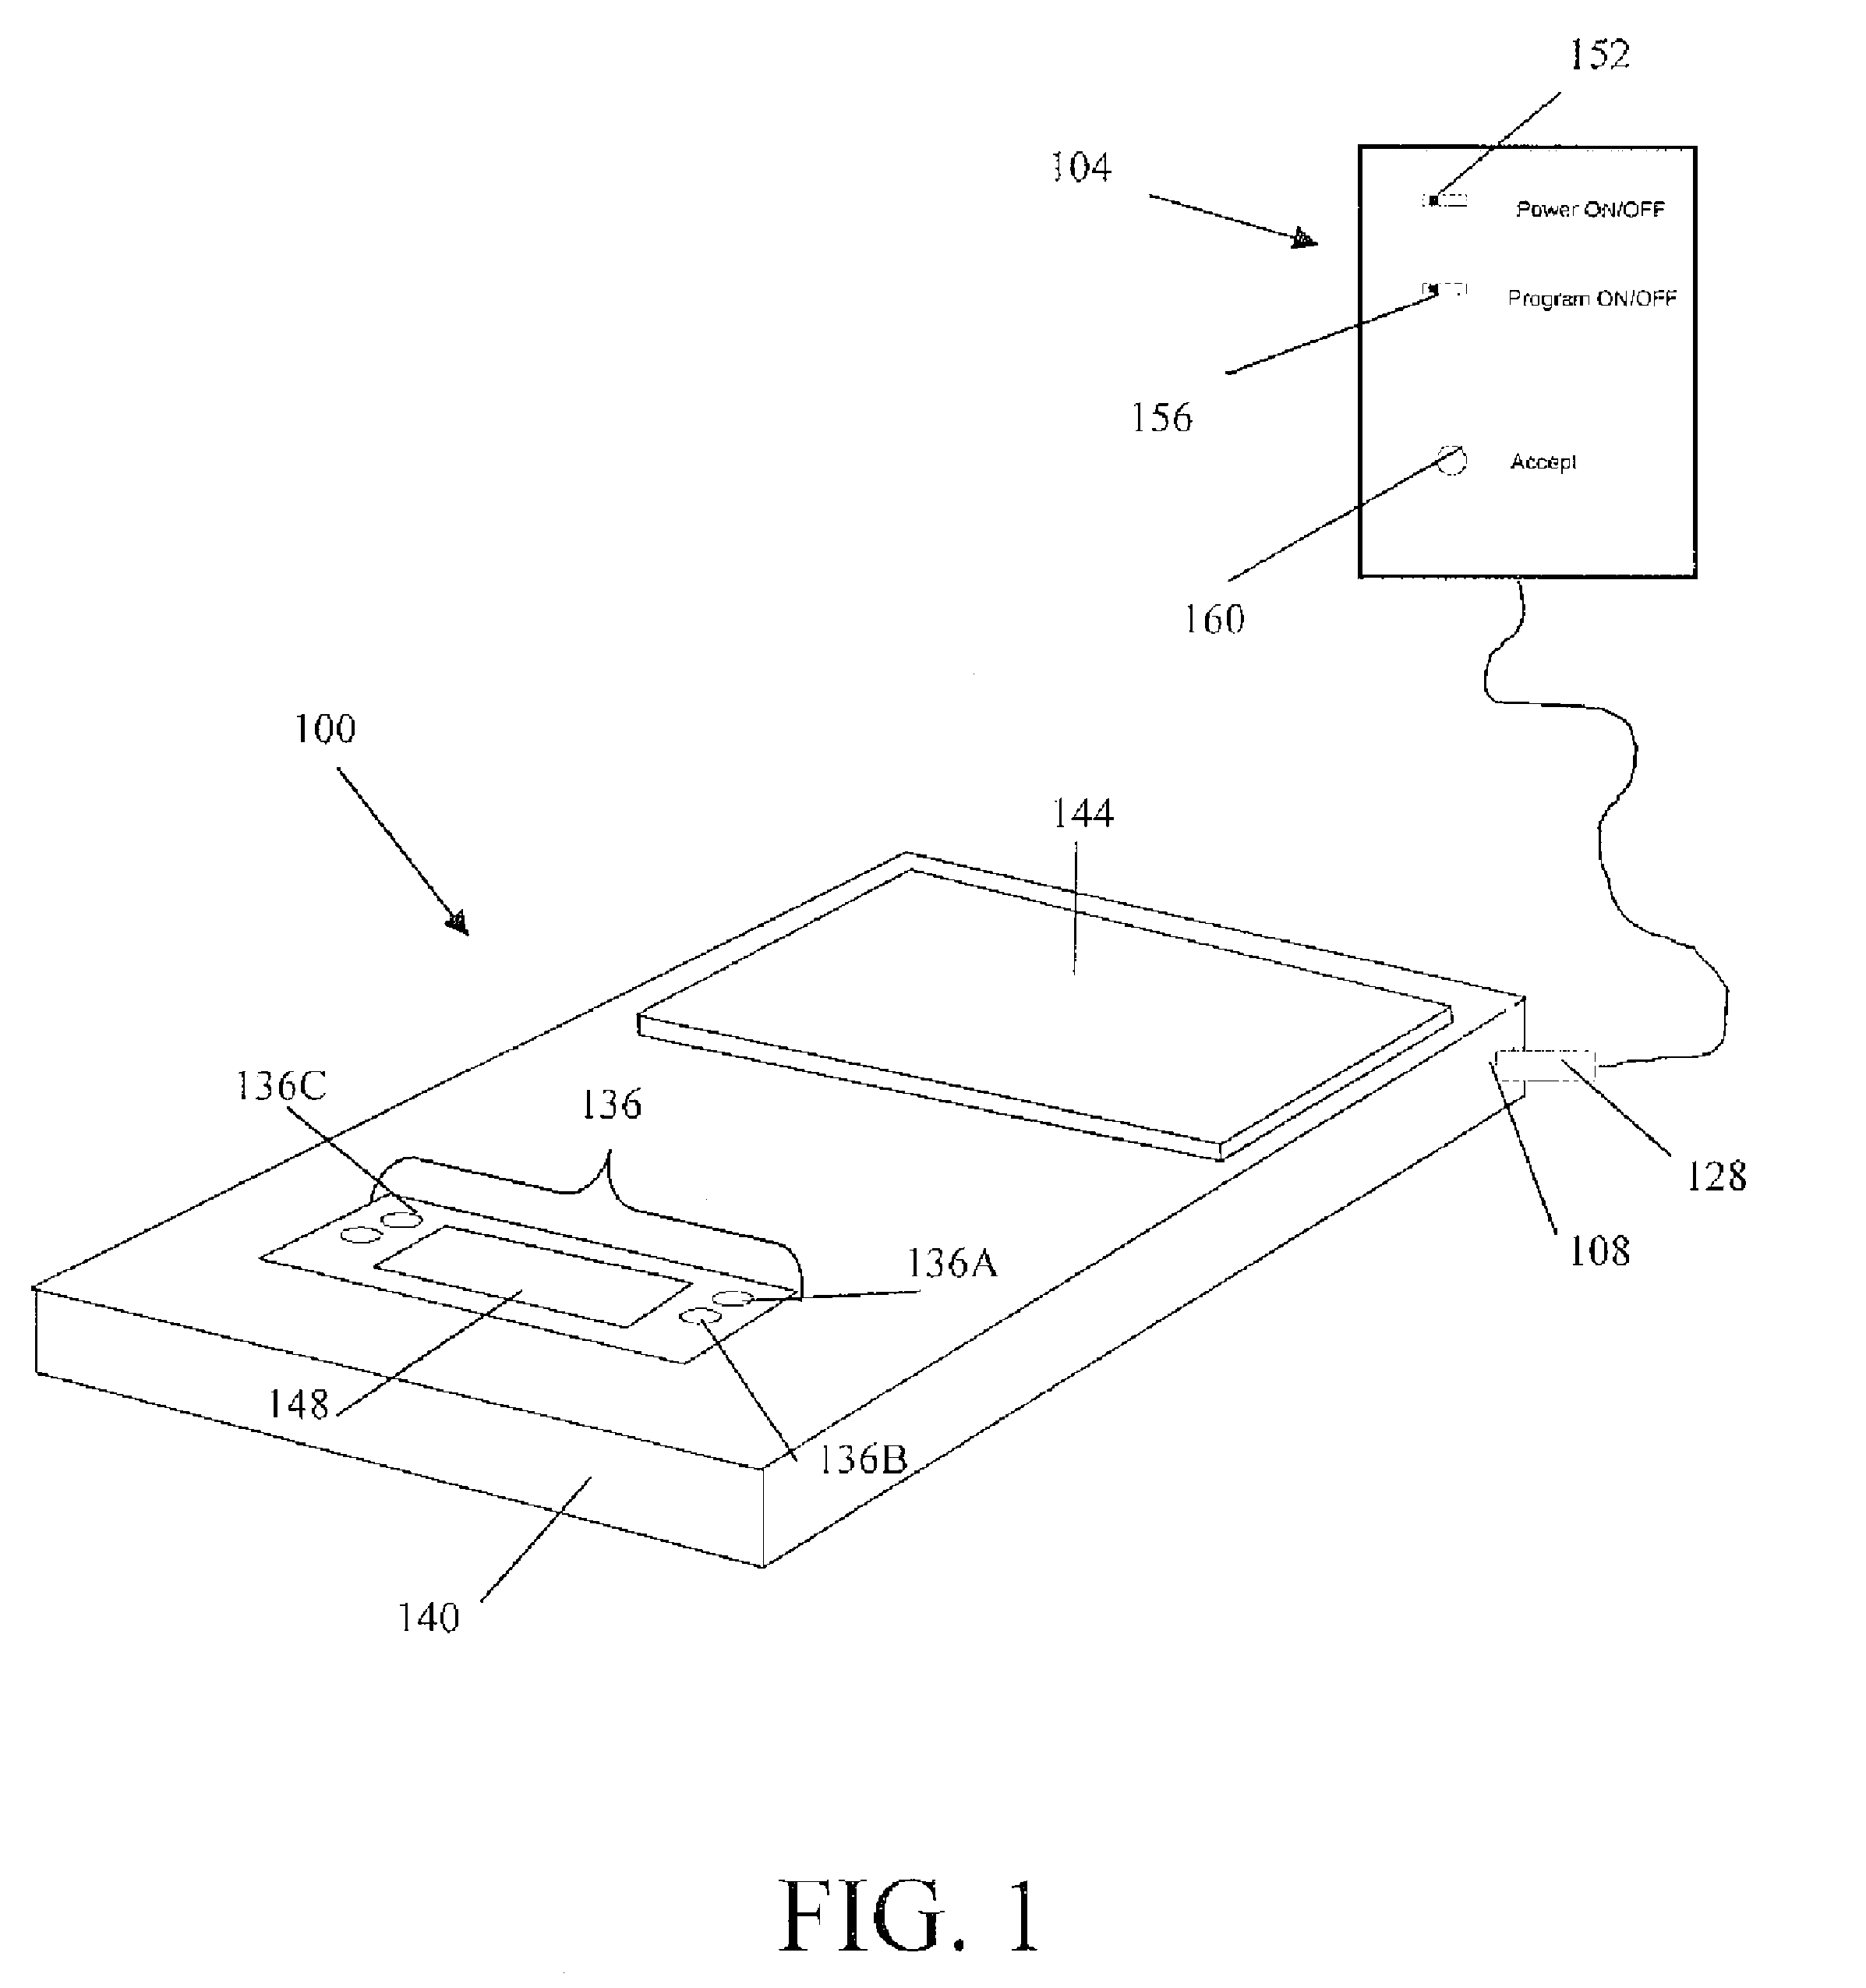 System and method for programming a weighing scale using a key signal to enter a programming mode